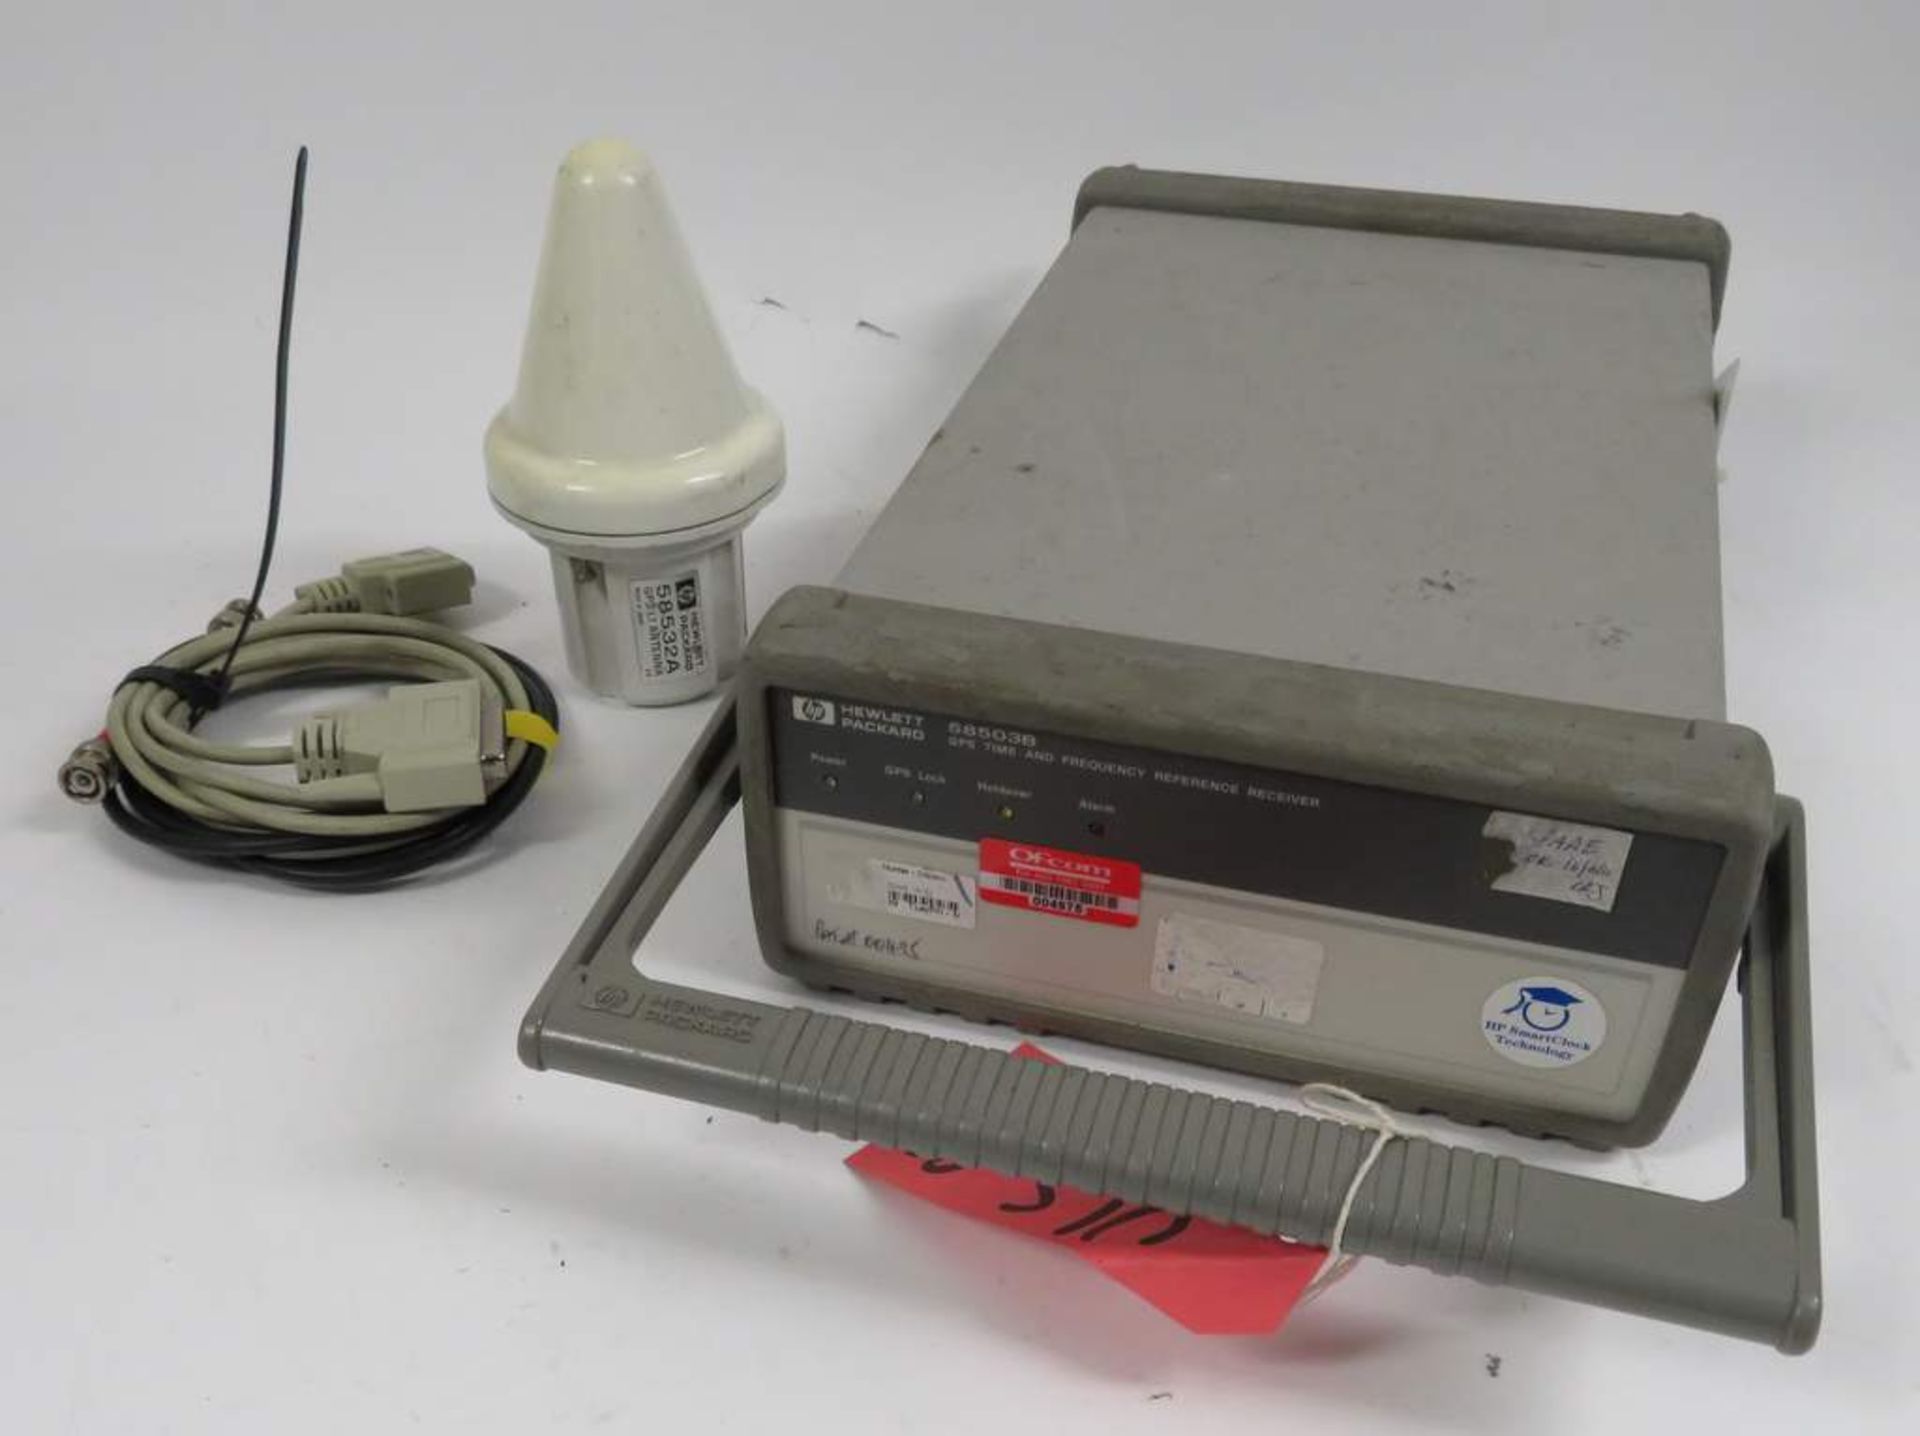 Hewlett Packard 58532A GPS L1 Antenna & HP 58503B GPS time and frequency reference receiver